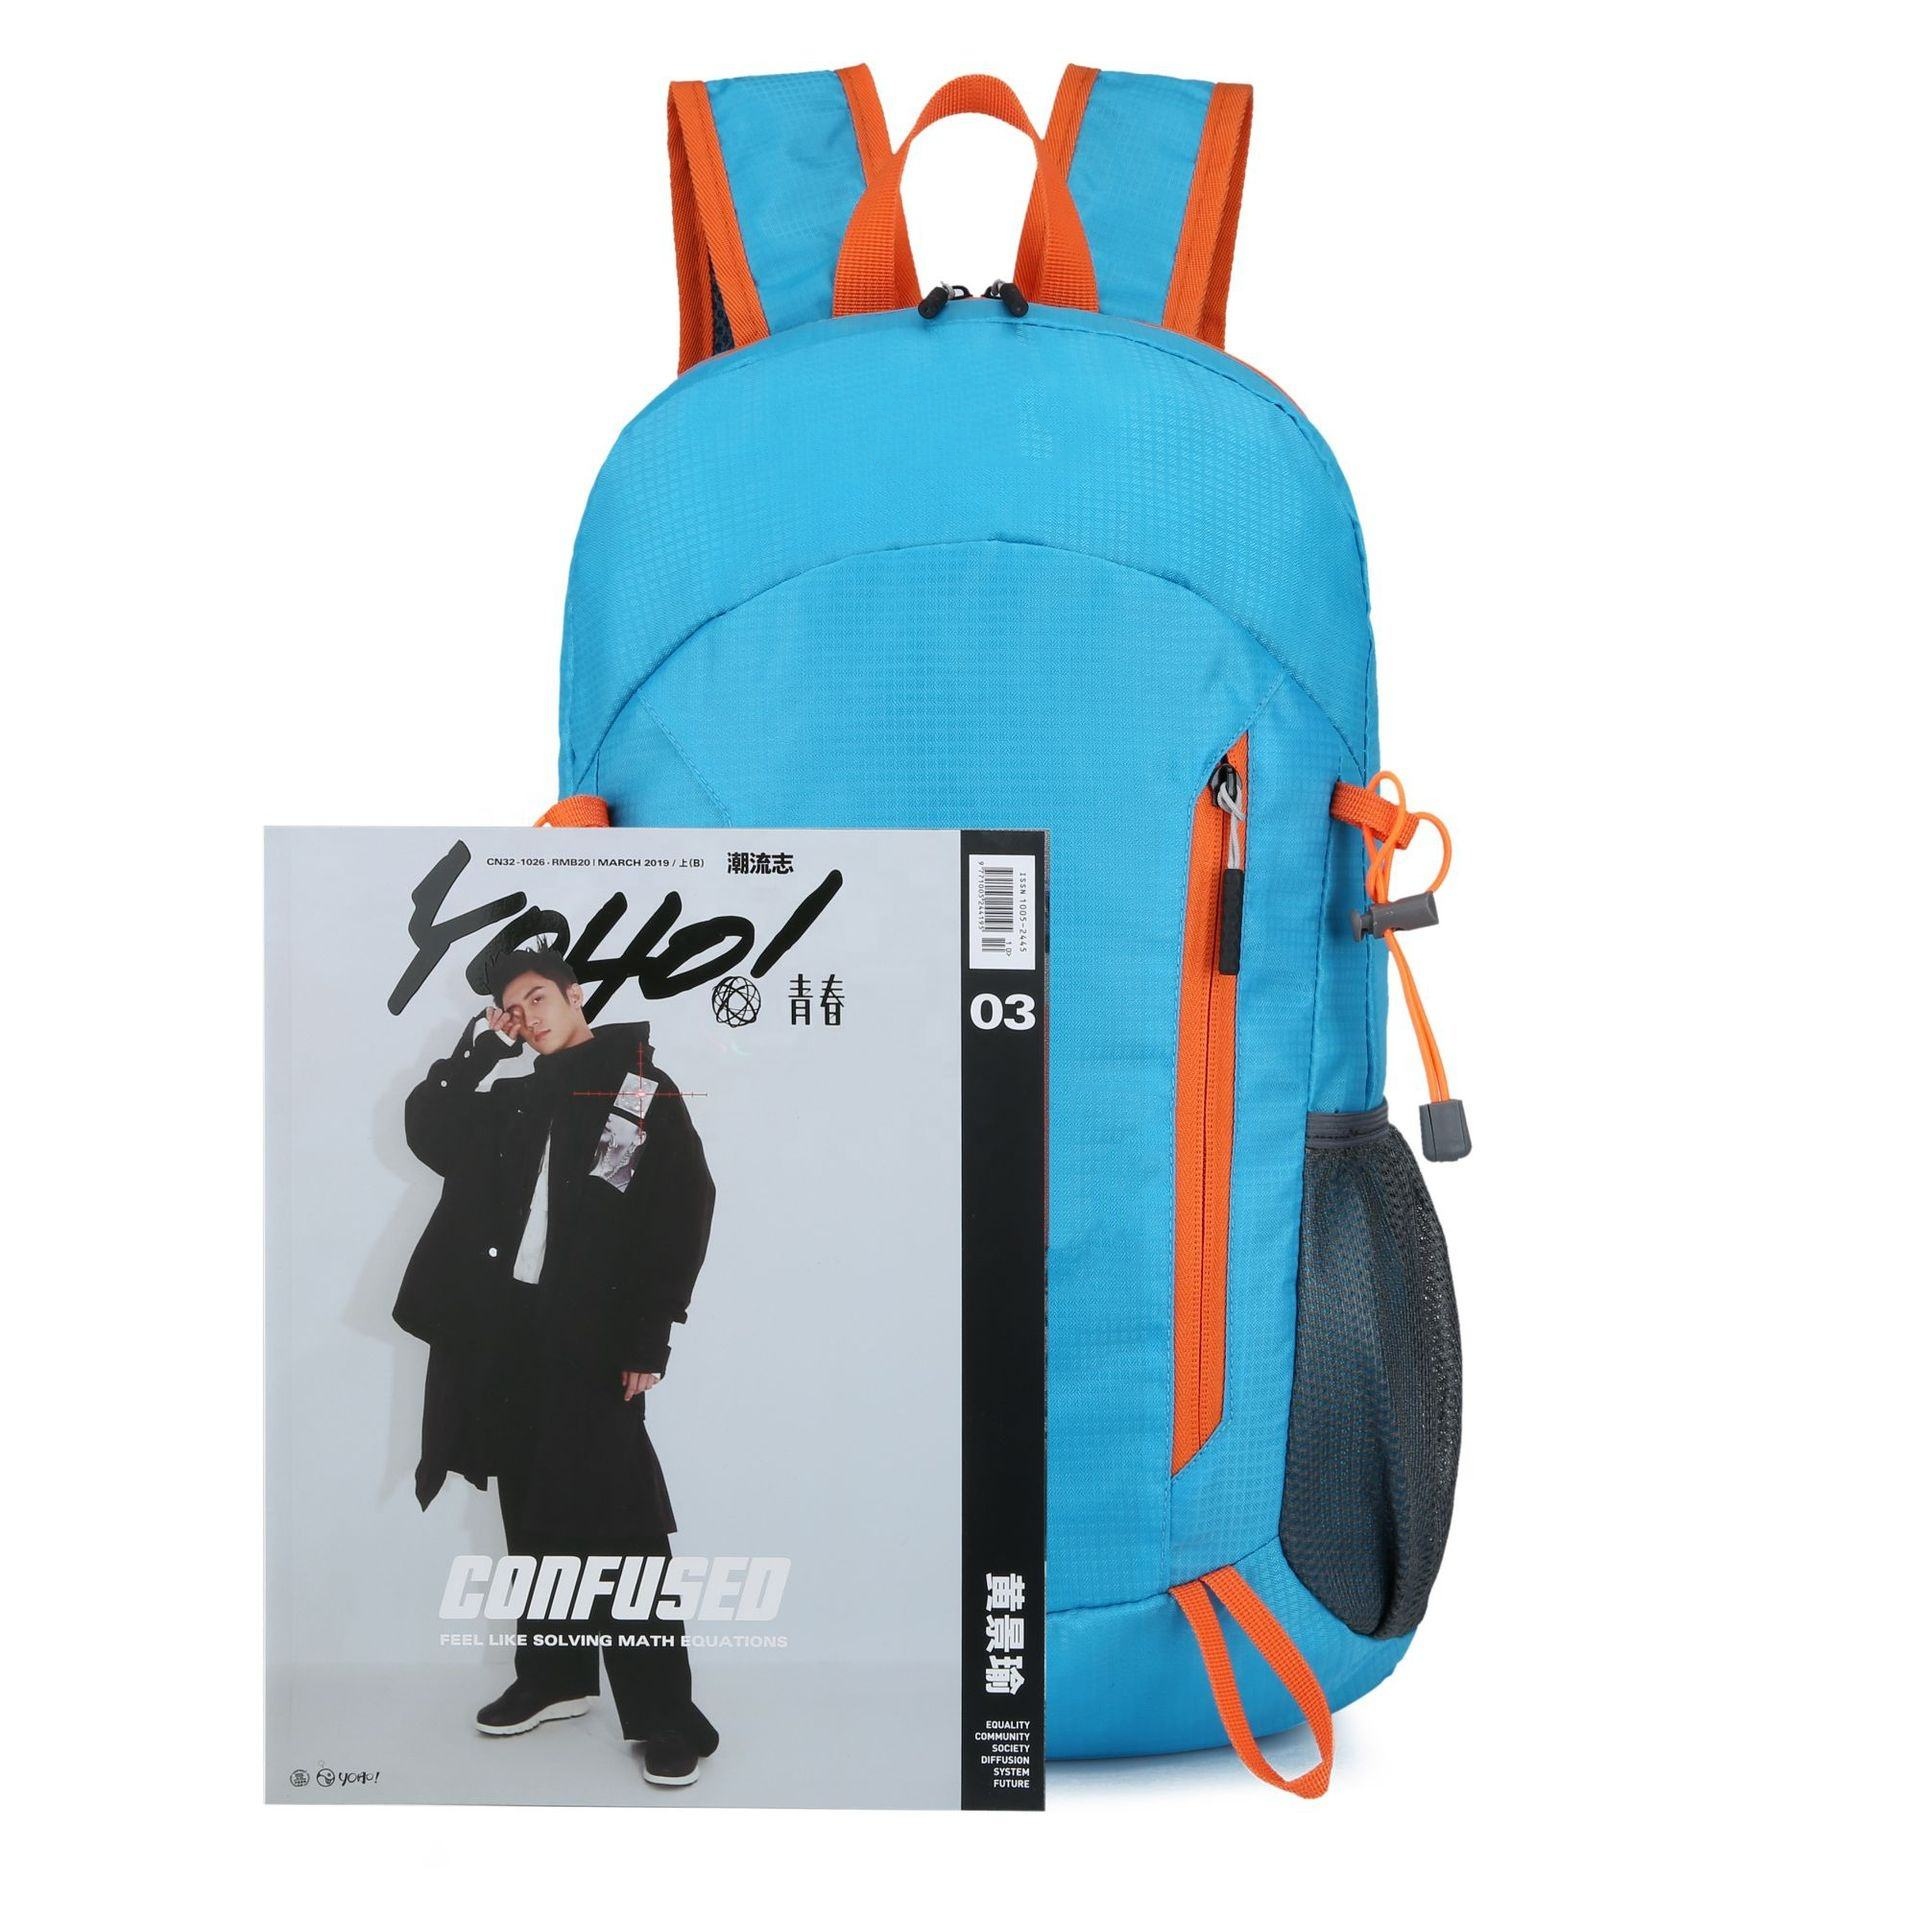 Sports Packable Foldable Hiking Backpacks Wholesale Product Details